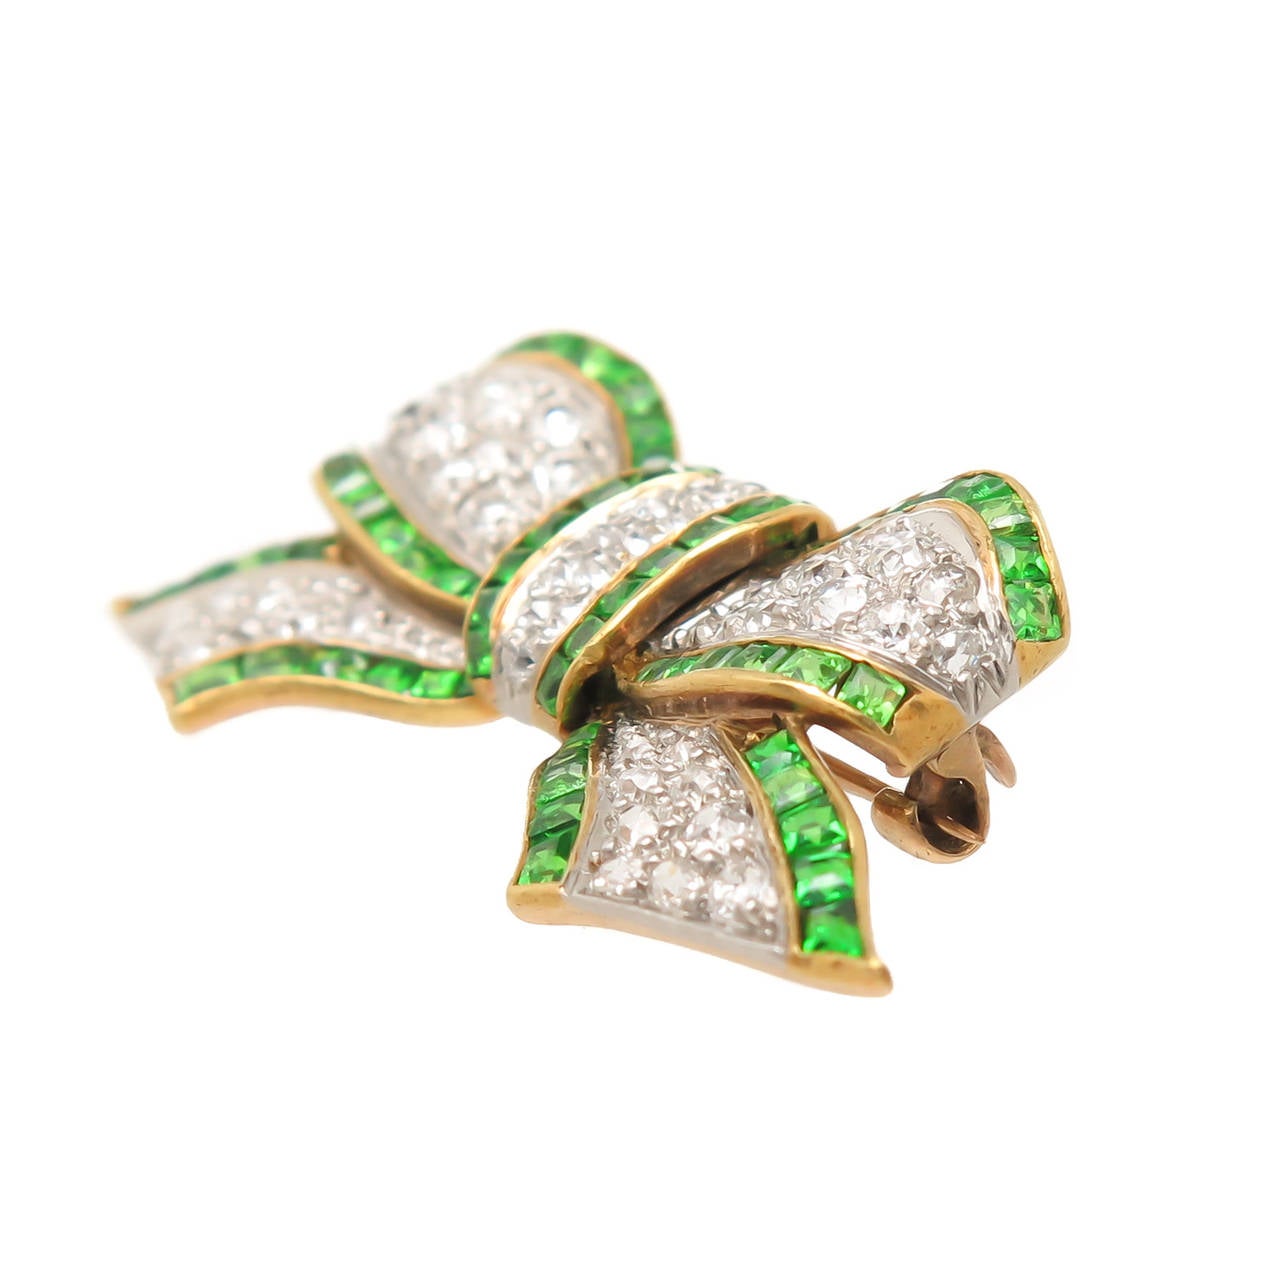 Edwardian 14K Yellow Gold and Platinum Bow Brooch, set with old mine cut diamonds that are white and clean and total 1.50 Carat. Further set with Square cut Green Demantoid Garnets that are of intense  bright Green color, most likely of Russian